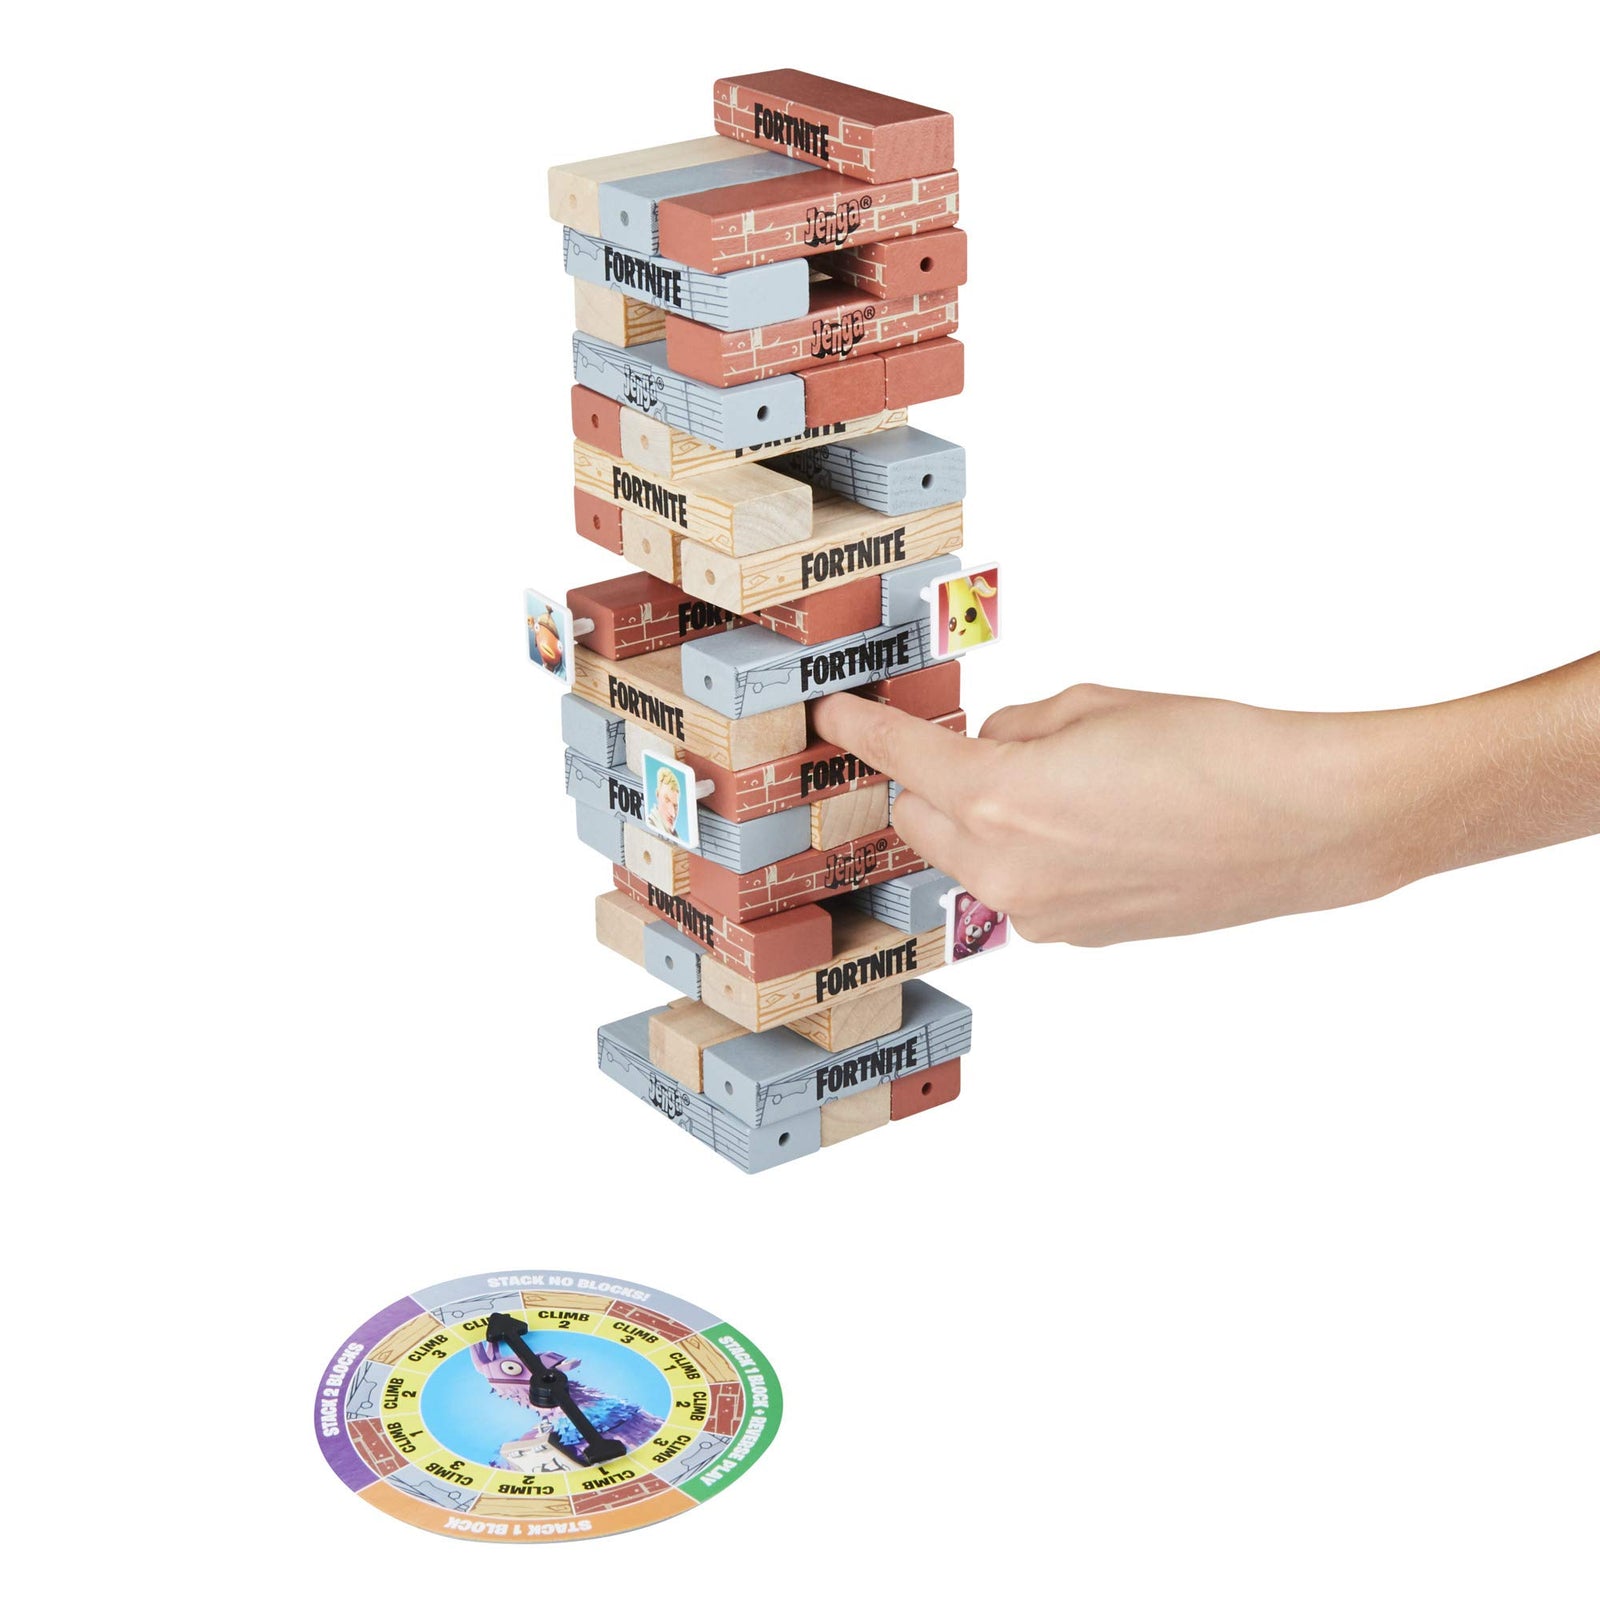 Hasbro Gaming Jenga: Fortnite Edition Game, Wooden Block Stacking Tower Game for Fortnite Fans, Ages 8 & Up